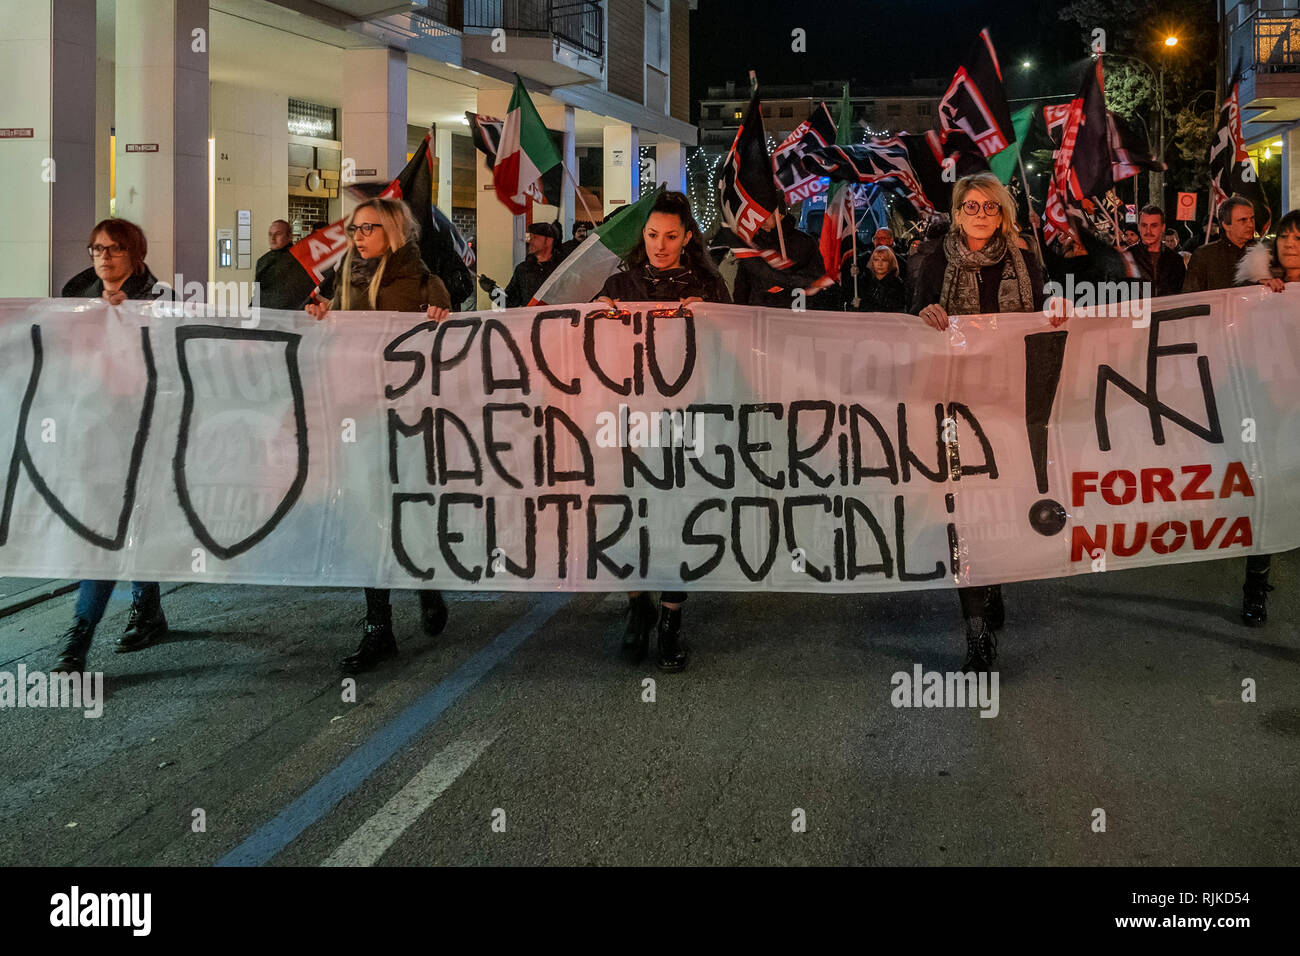 Mestre, Italy. 06th Feb, 2019. Protest of 'Forza Nuova' against 'Centri Sociali' and drug dealing in Mestre, Italy. Credit: Stefano Mazzola/Awakening/Alamy Live News Stock Photo